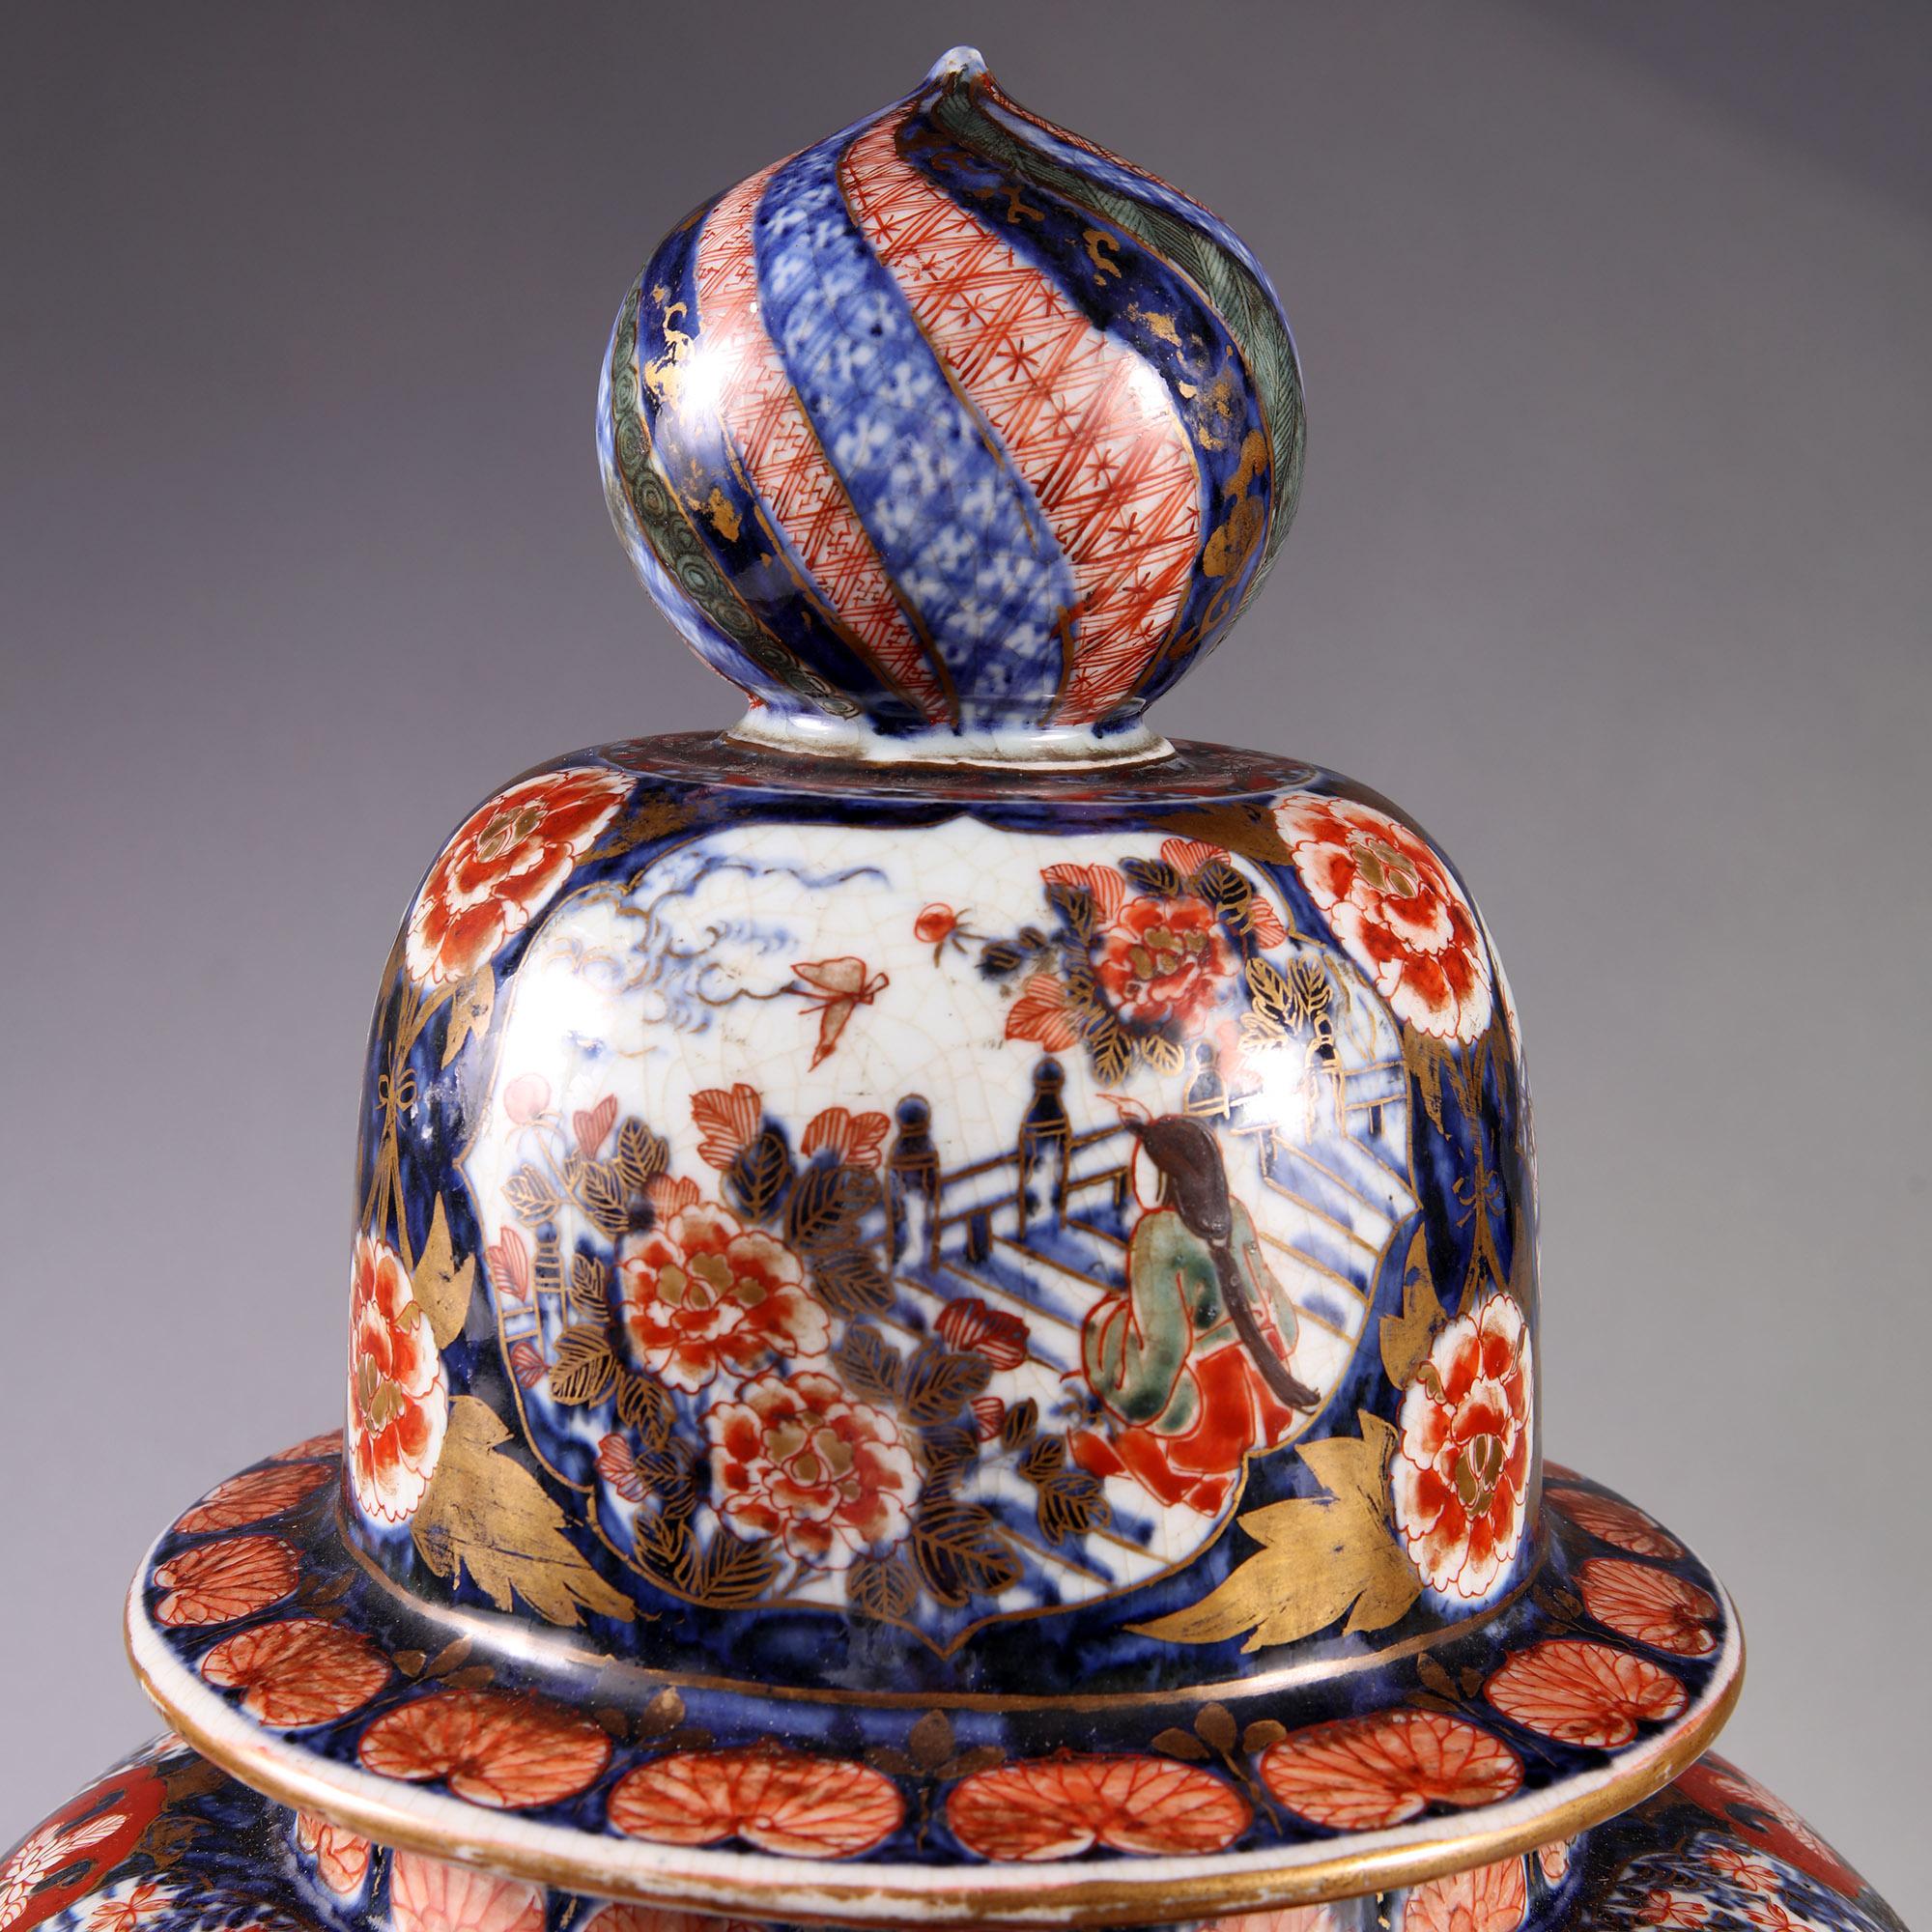 19th Century Japanese Imari Porcelain Vase and Cover  In Good Condition For Sale In London, by appointment only